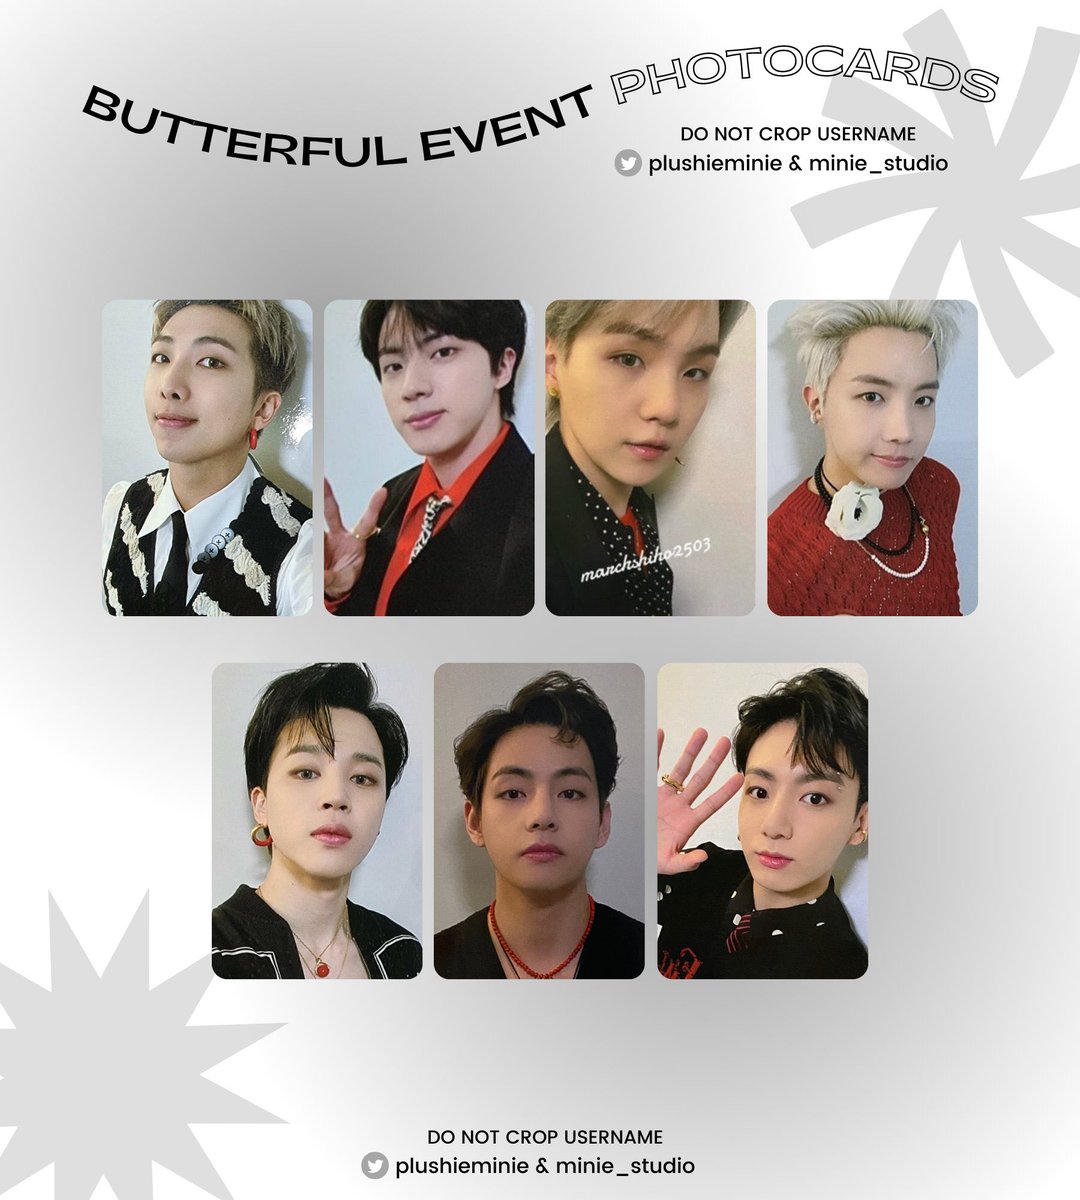 Butterful lucky draw event карта. Butterful Lucky draw event от Jungkook фотокарточка. Чонгук Butterful Lucky event. Чонгук Butterful Lucky draw event.